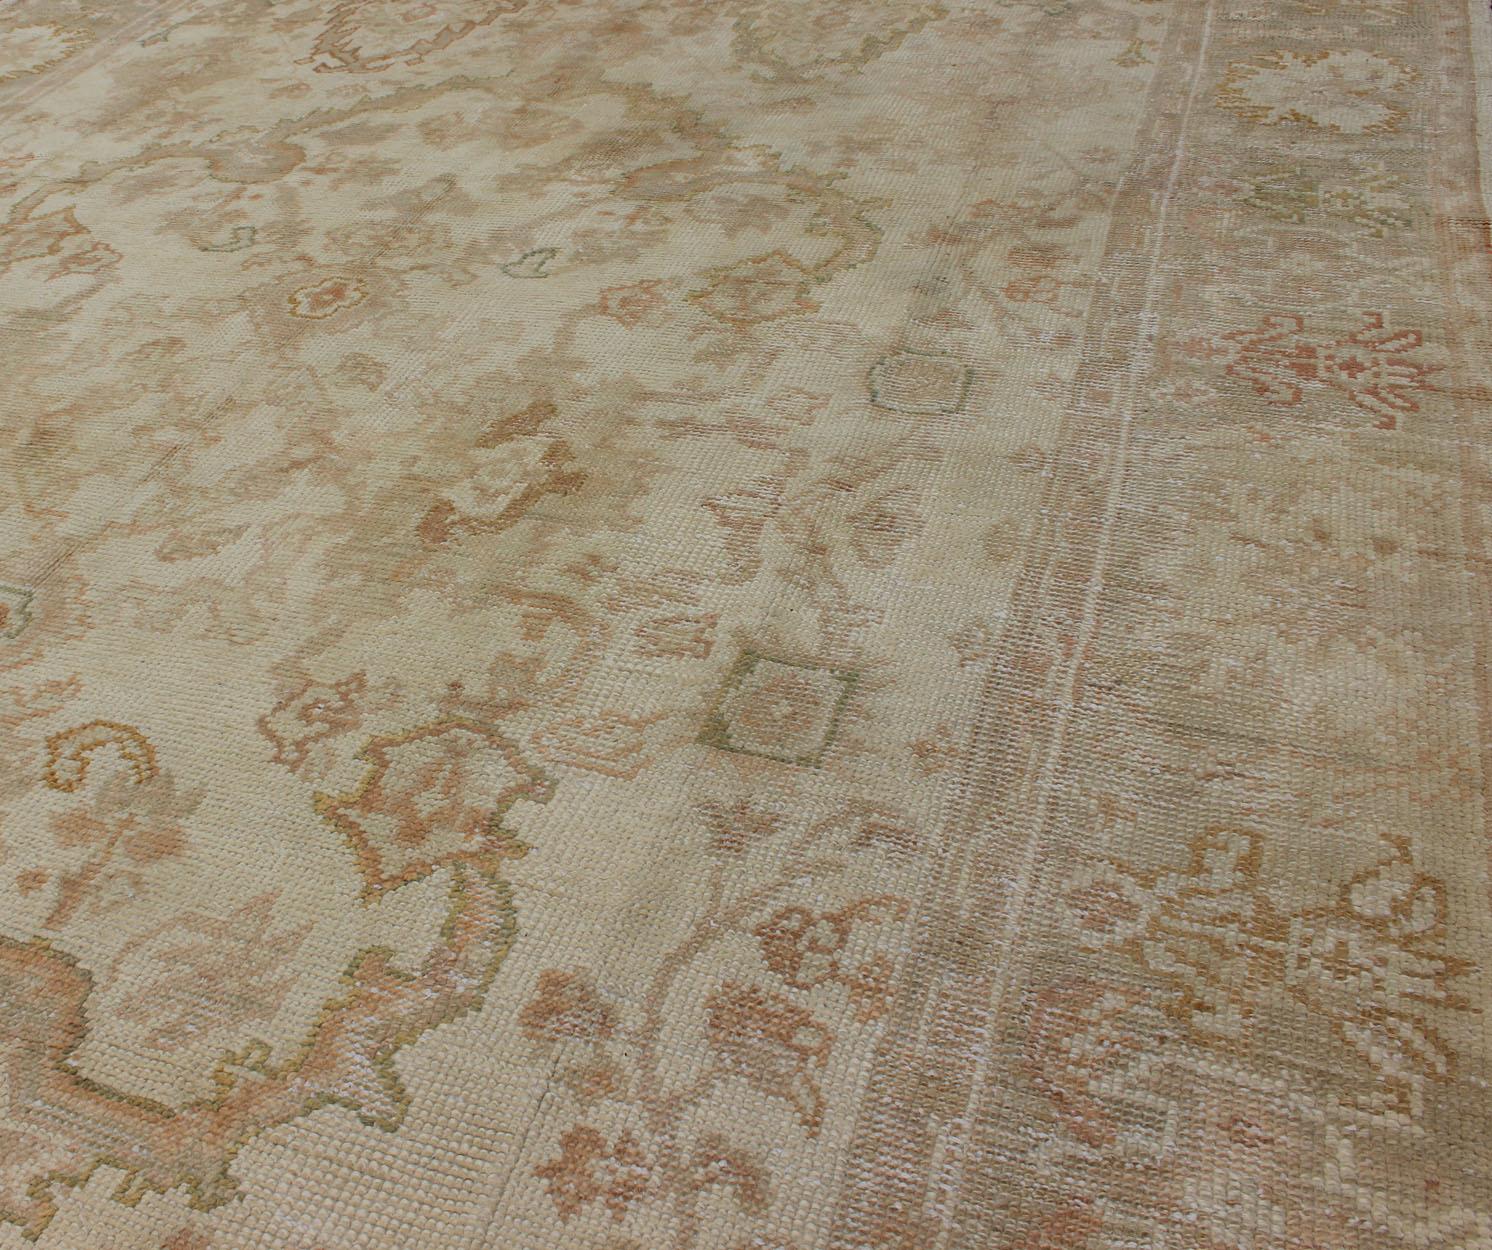 Antique Turkish Hand Knotted Oushak Rug in Taupe, Beige, Green and Copper In Good Condition For Sale In Atlanta, GA